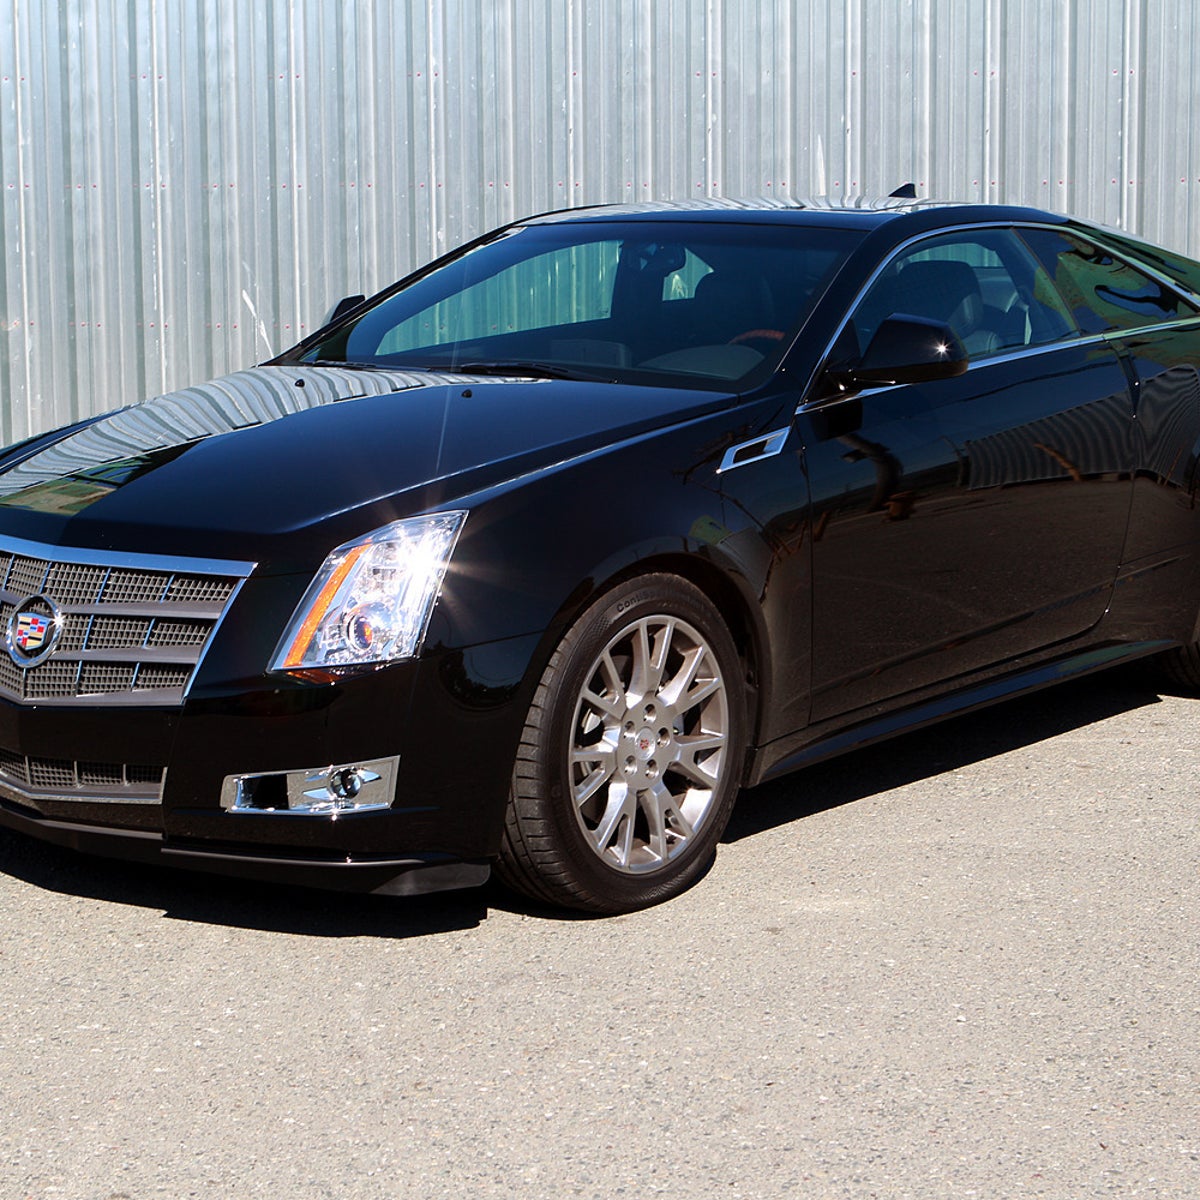 2011 Cadillac CTS Coupe review: 2011 Cadillac CTS Coupe - CNET